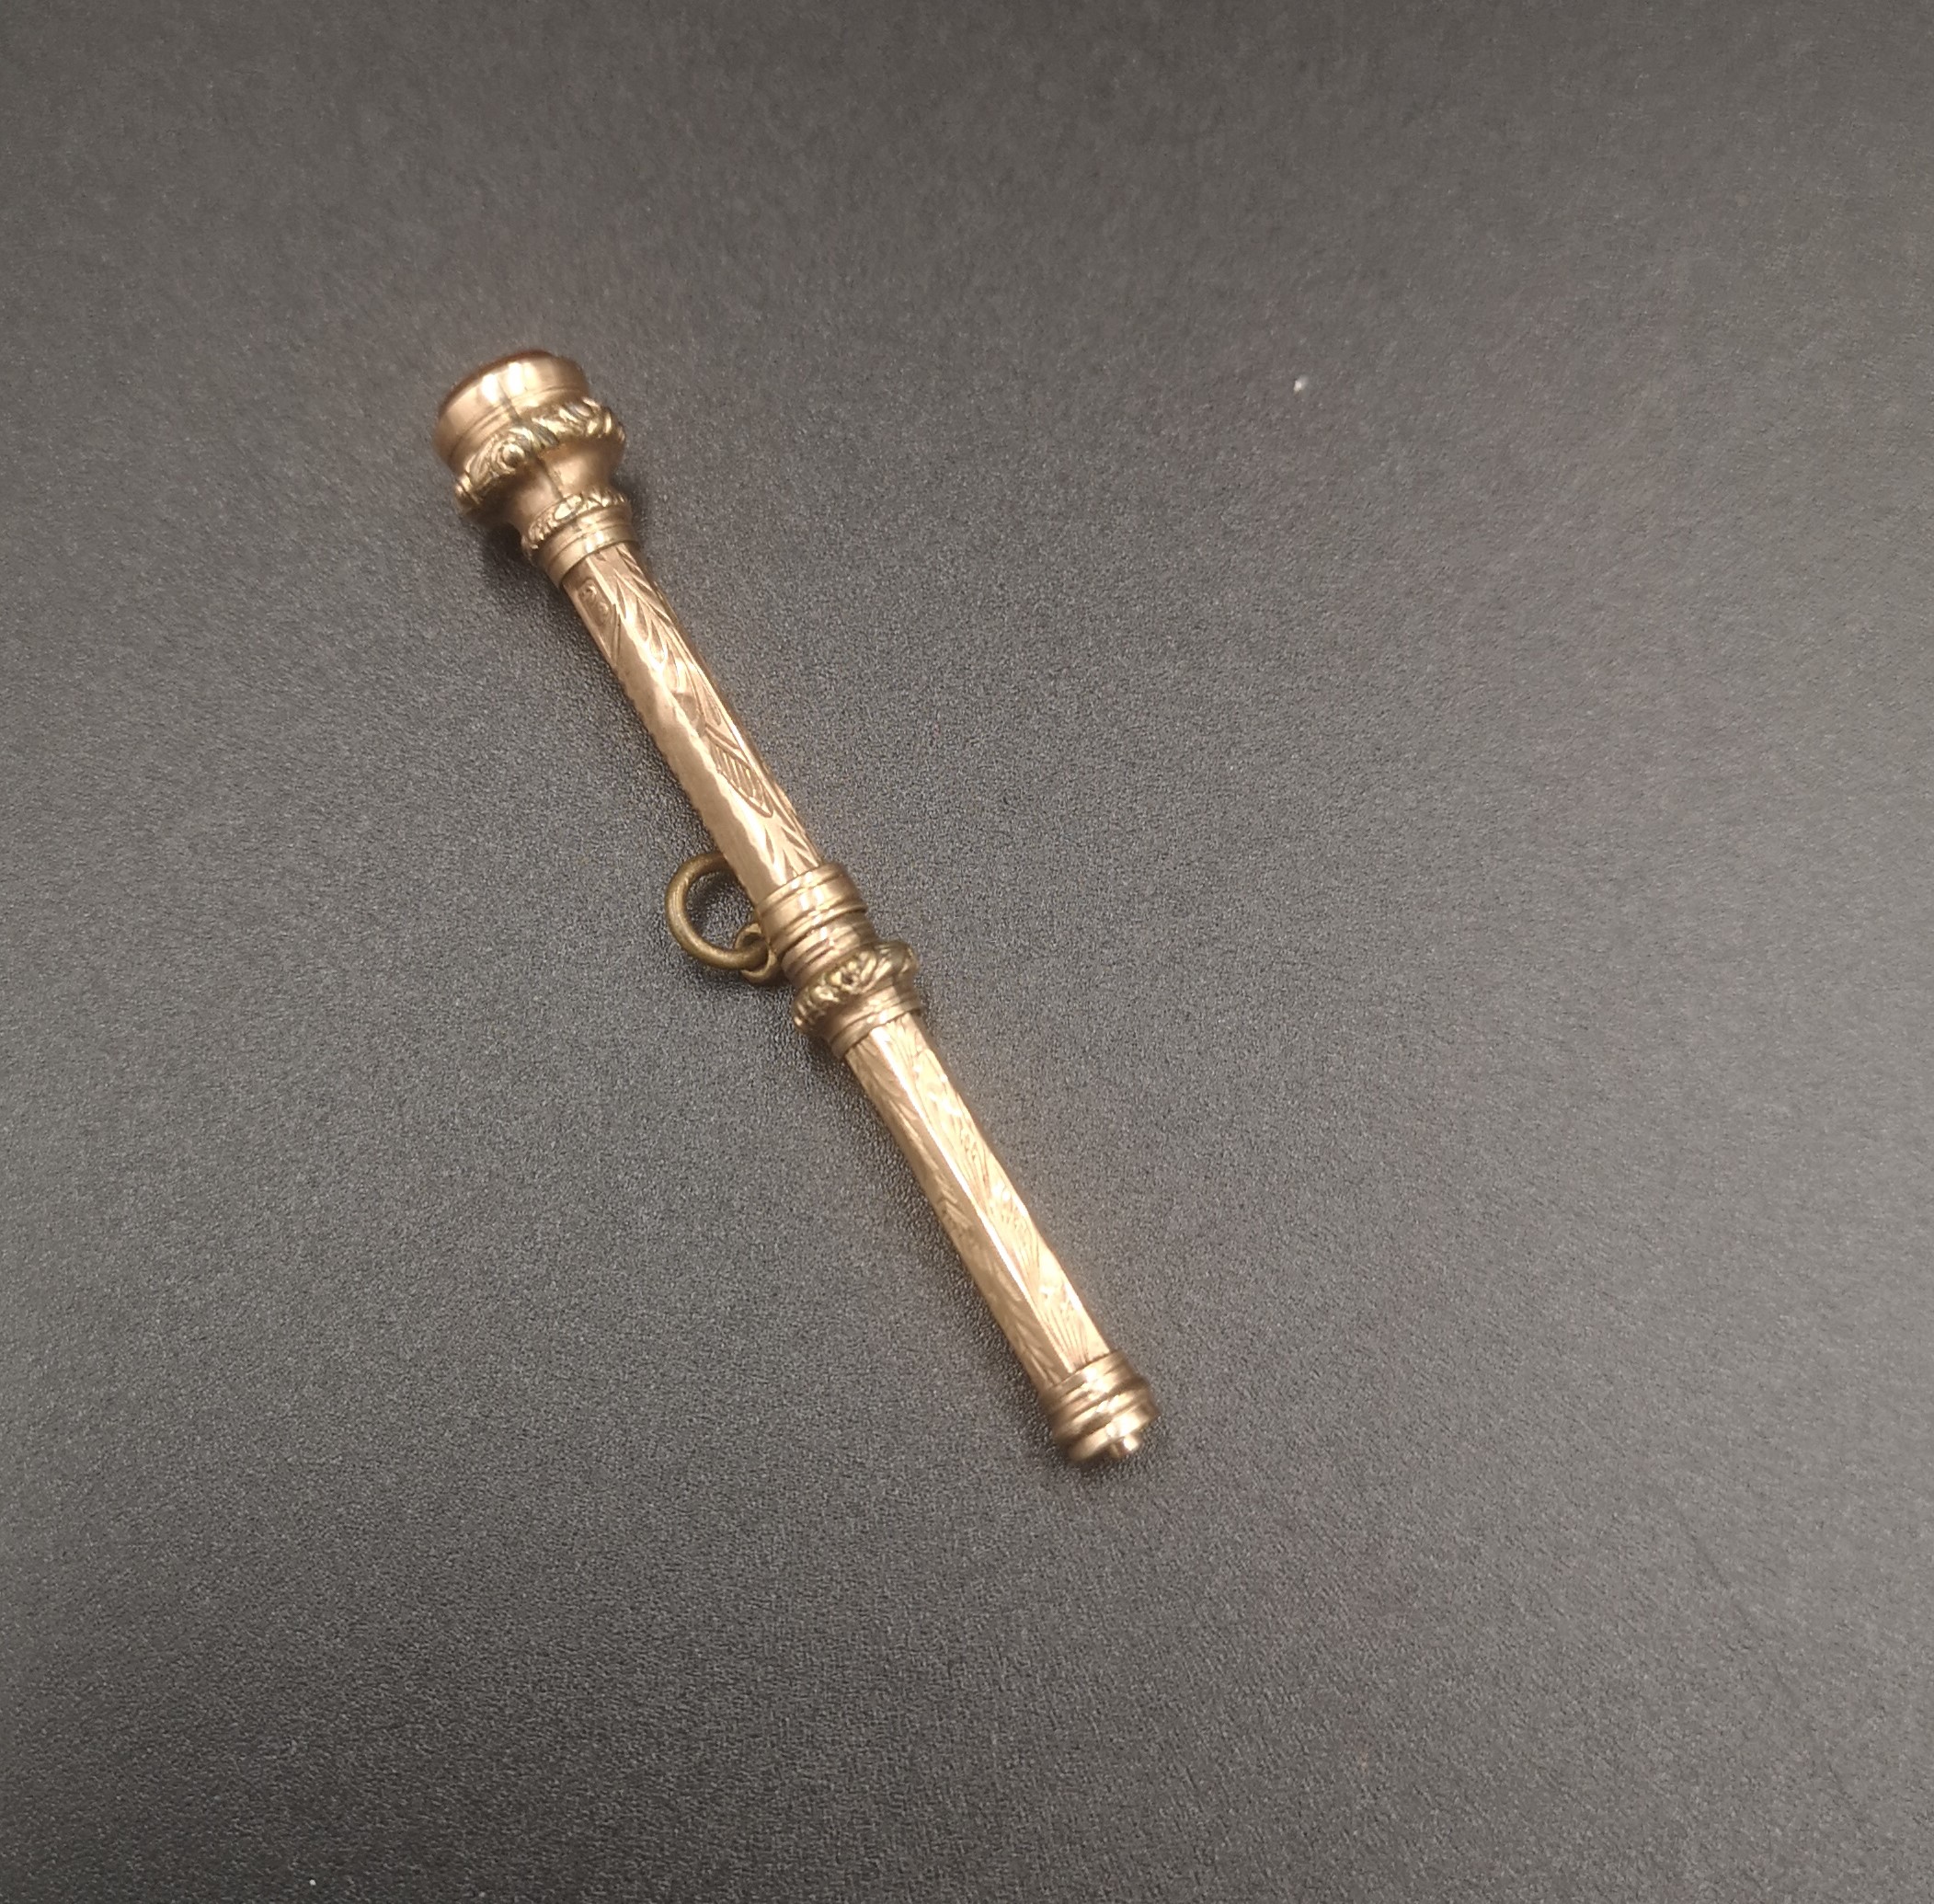 Victorian gold mechanical pencil - Image 2 of 5